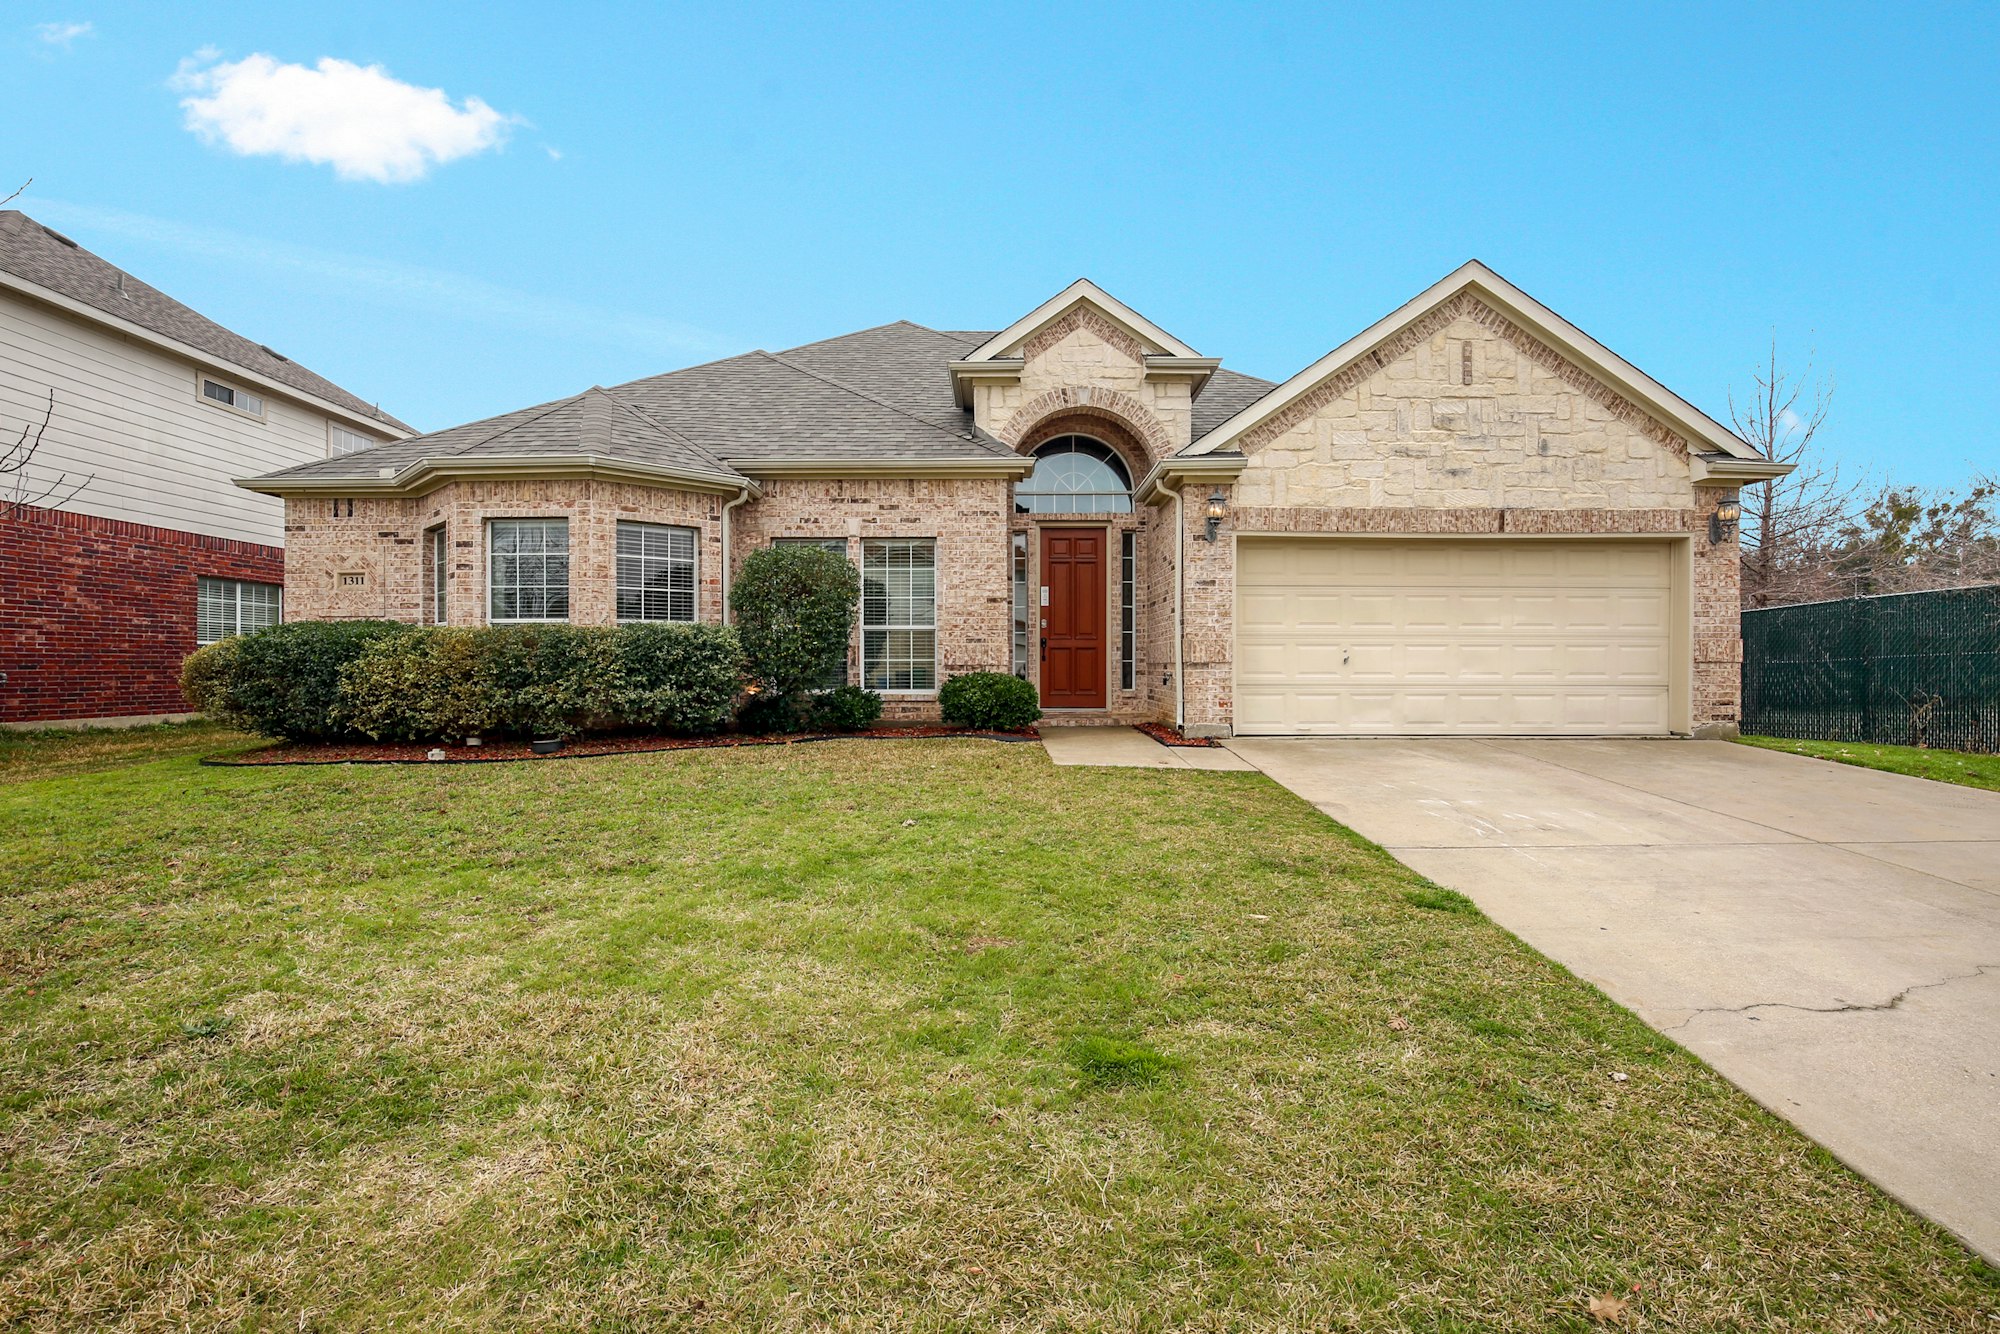 Photo 1 of 25 - 1311 Belleview Dr, Mansfield, TX 76063